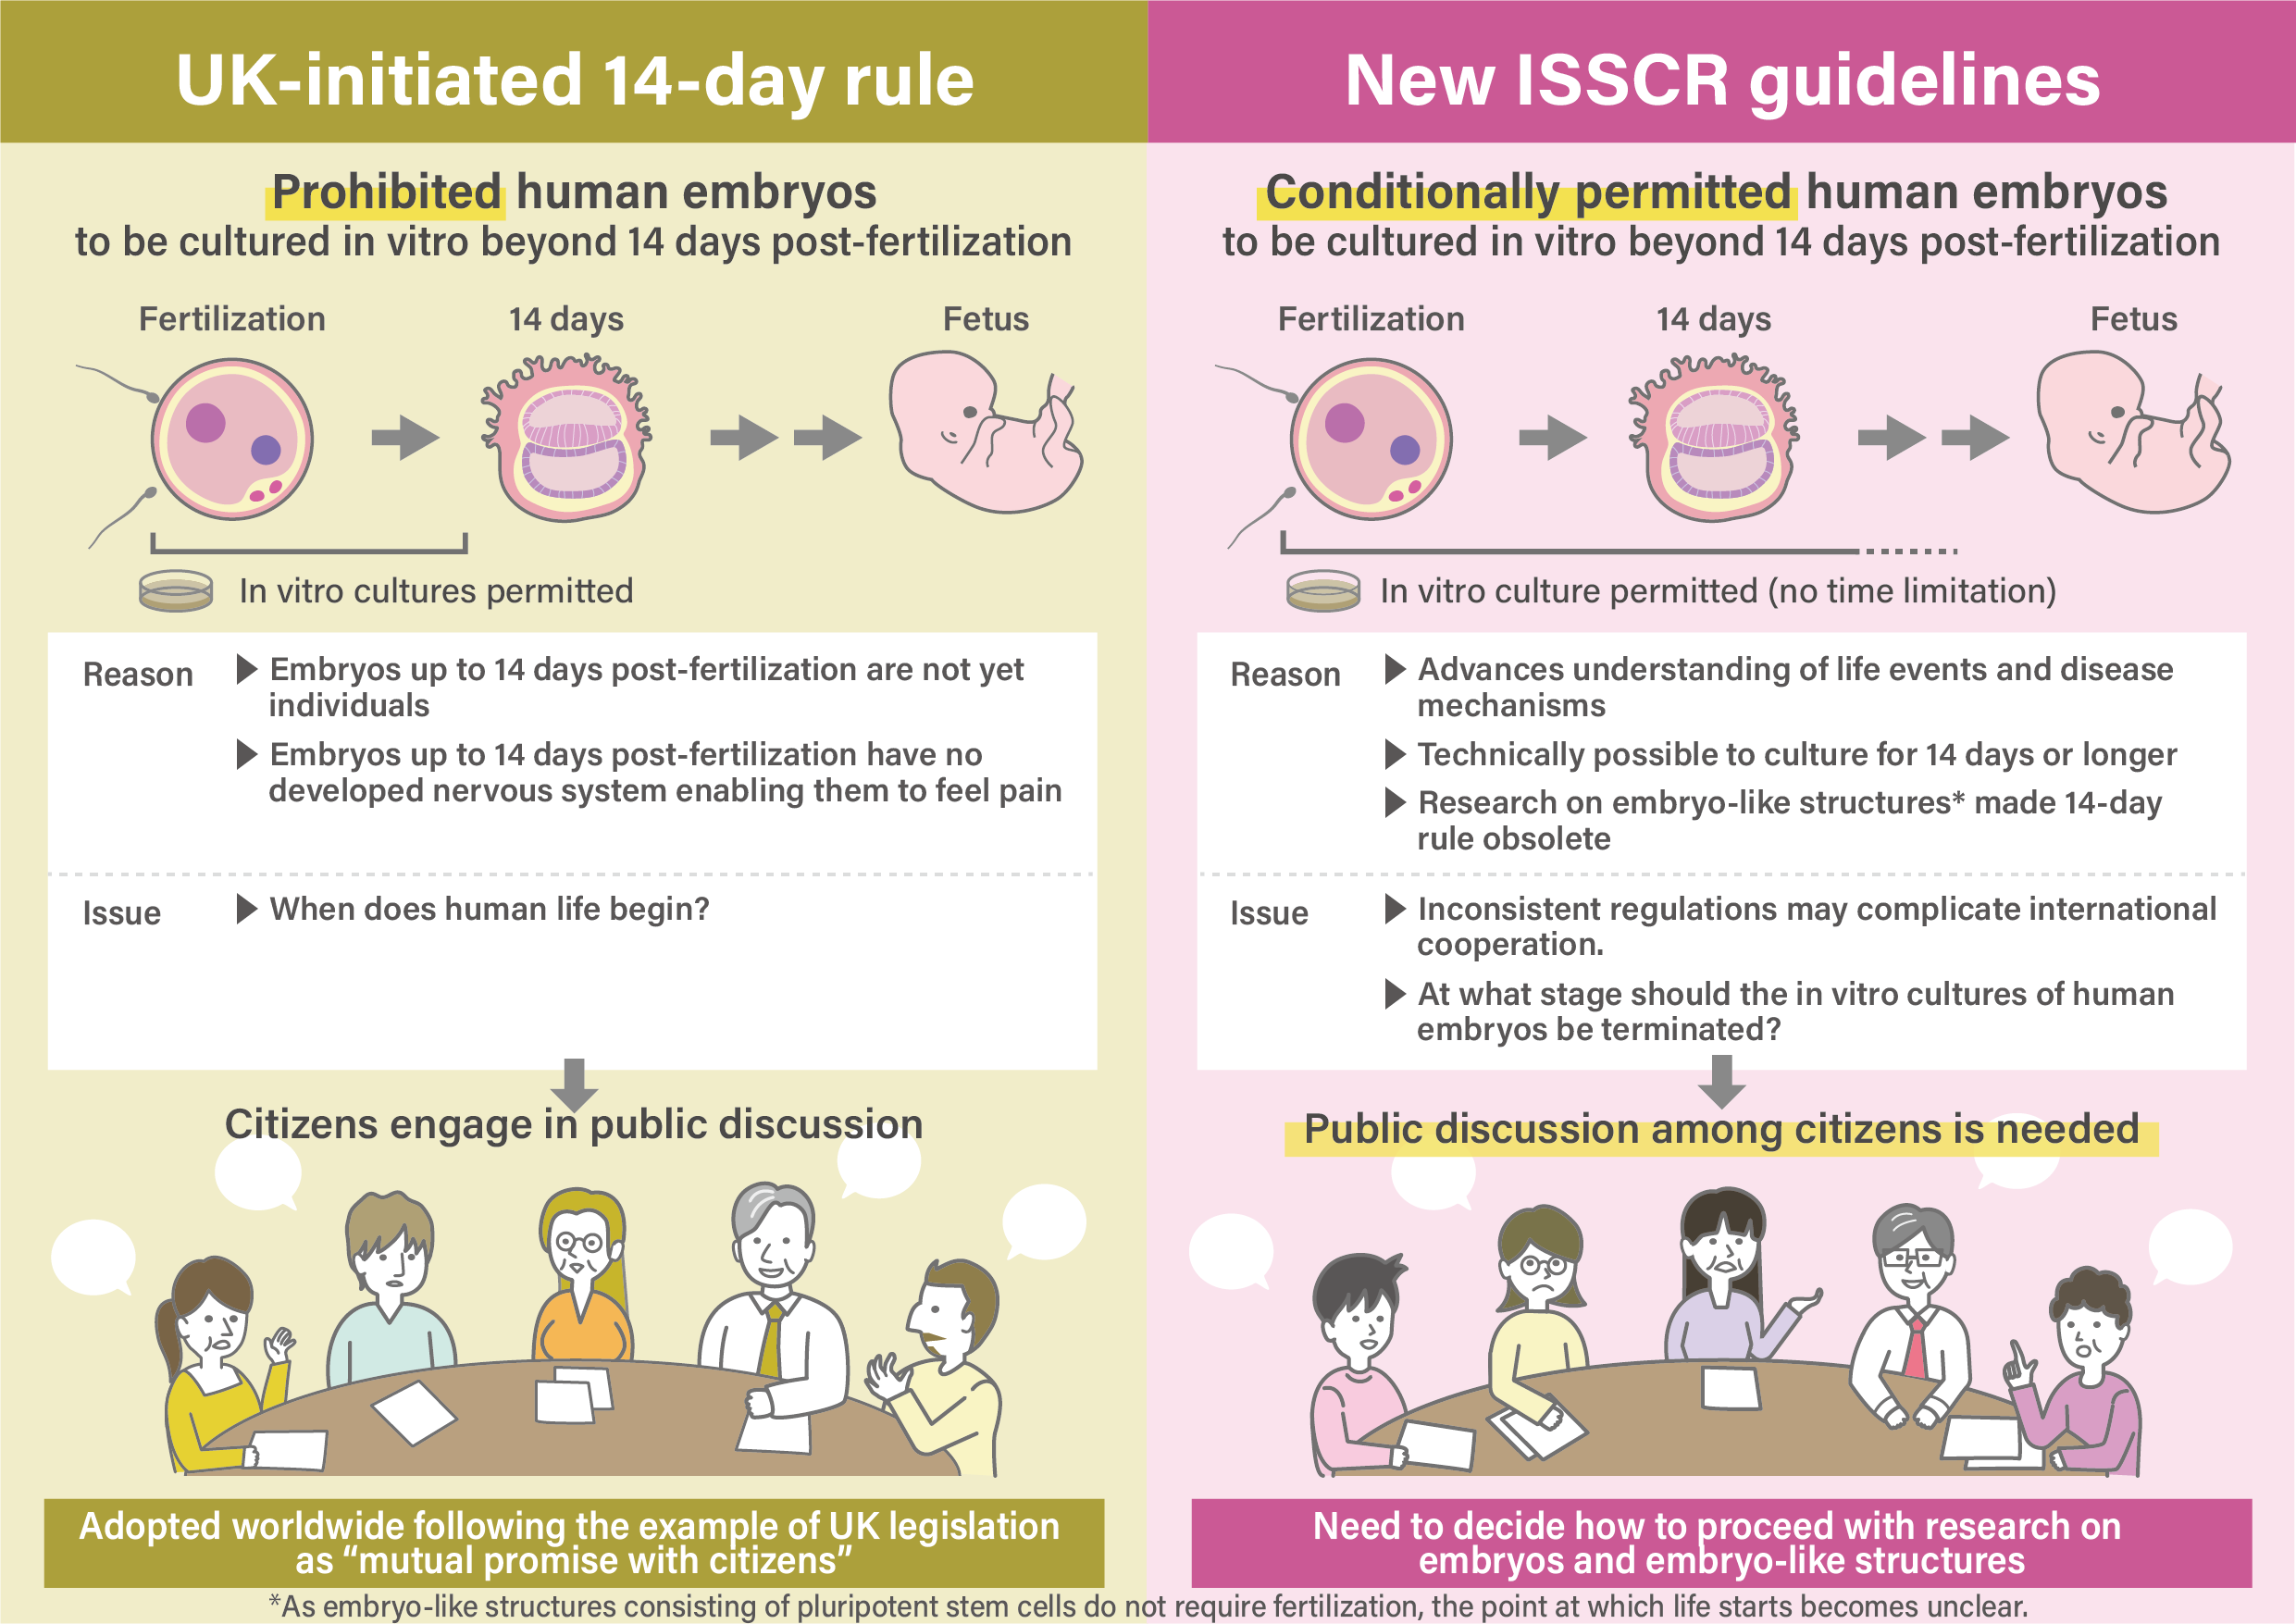 Science is based on promises, not on mere rules - Japanese ethicists respond to major change in international guidelines on embryo research